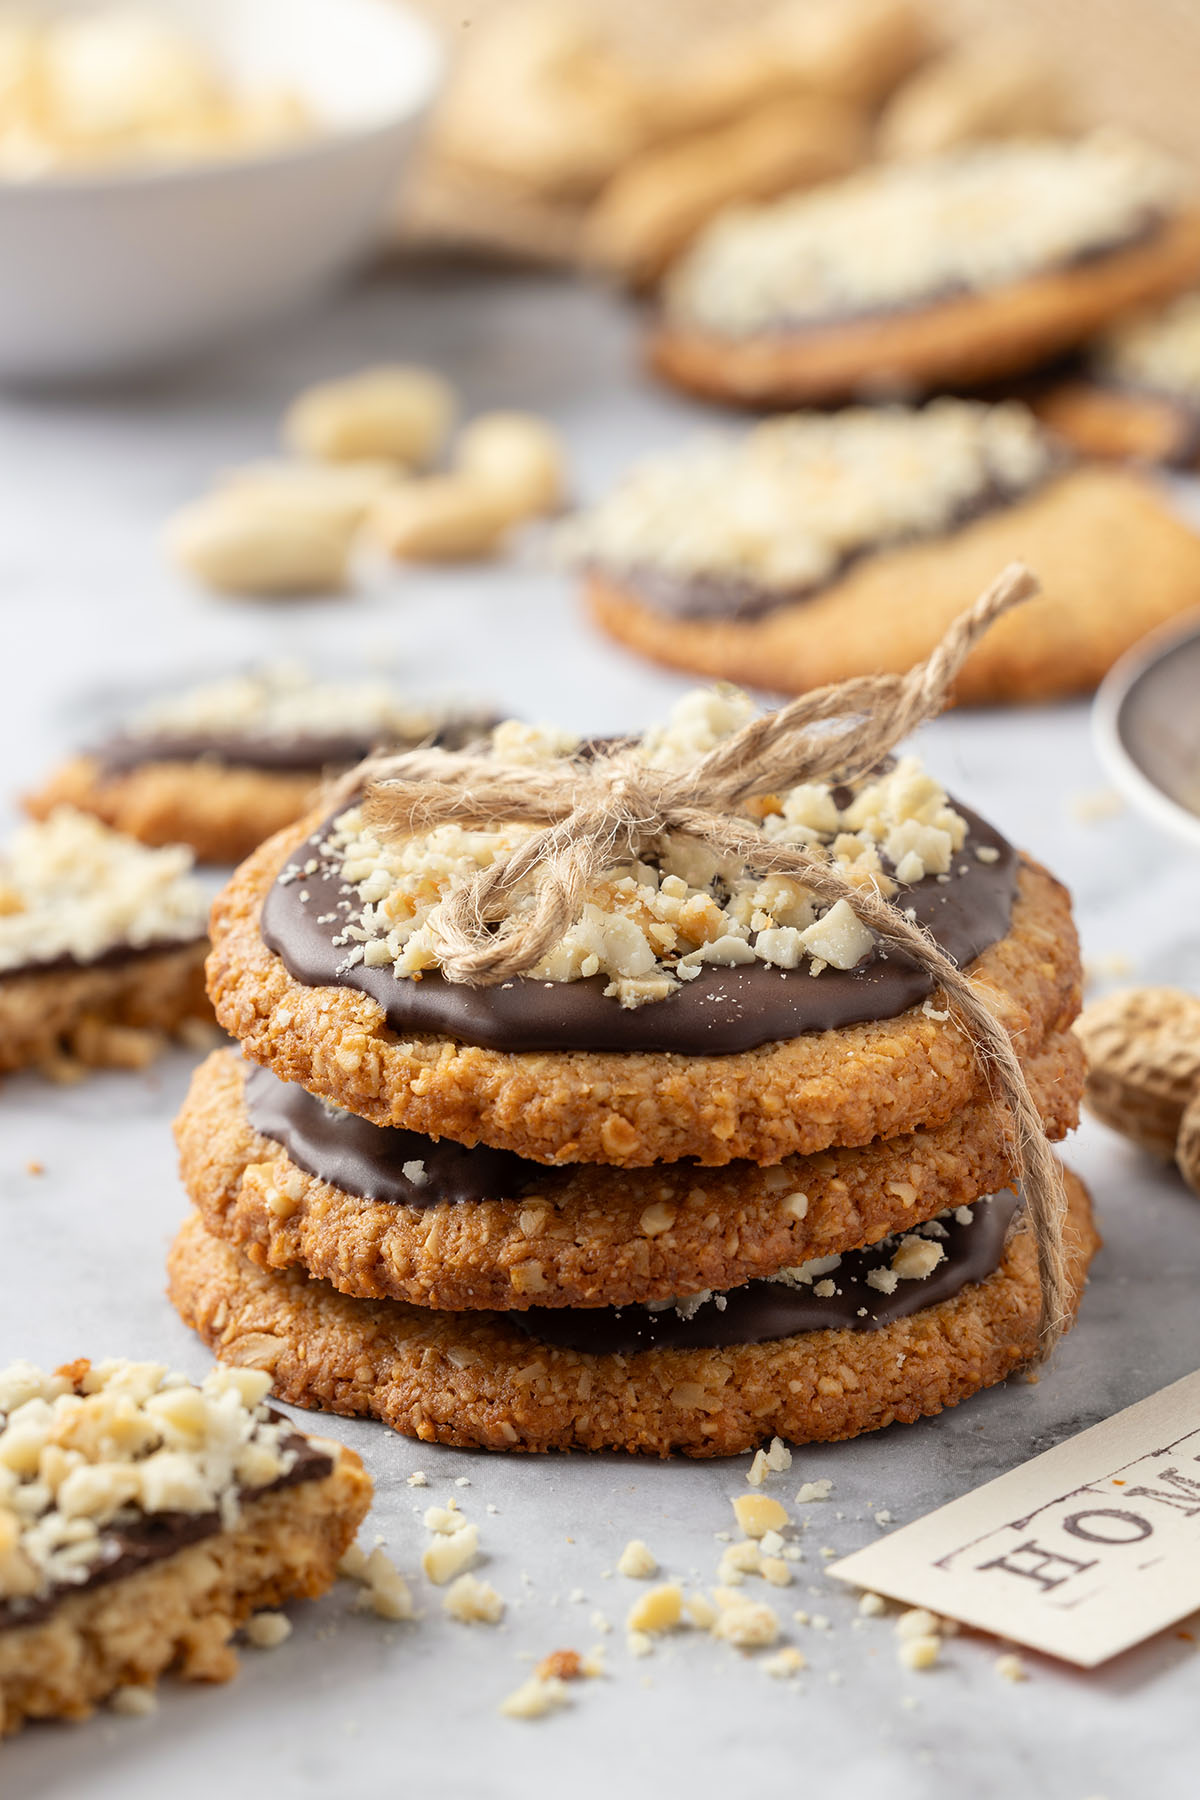 Stack of Chocolate-Dipped Oatmeal Peanut Cookies